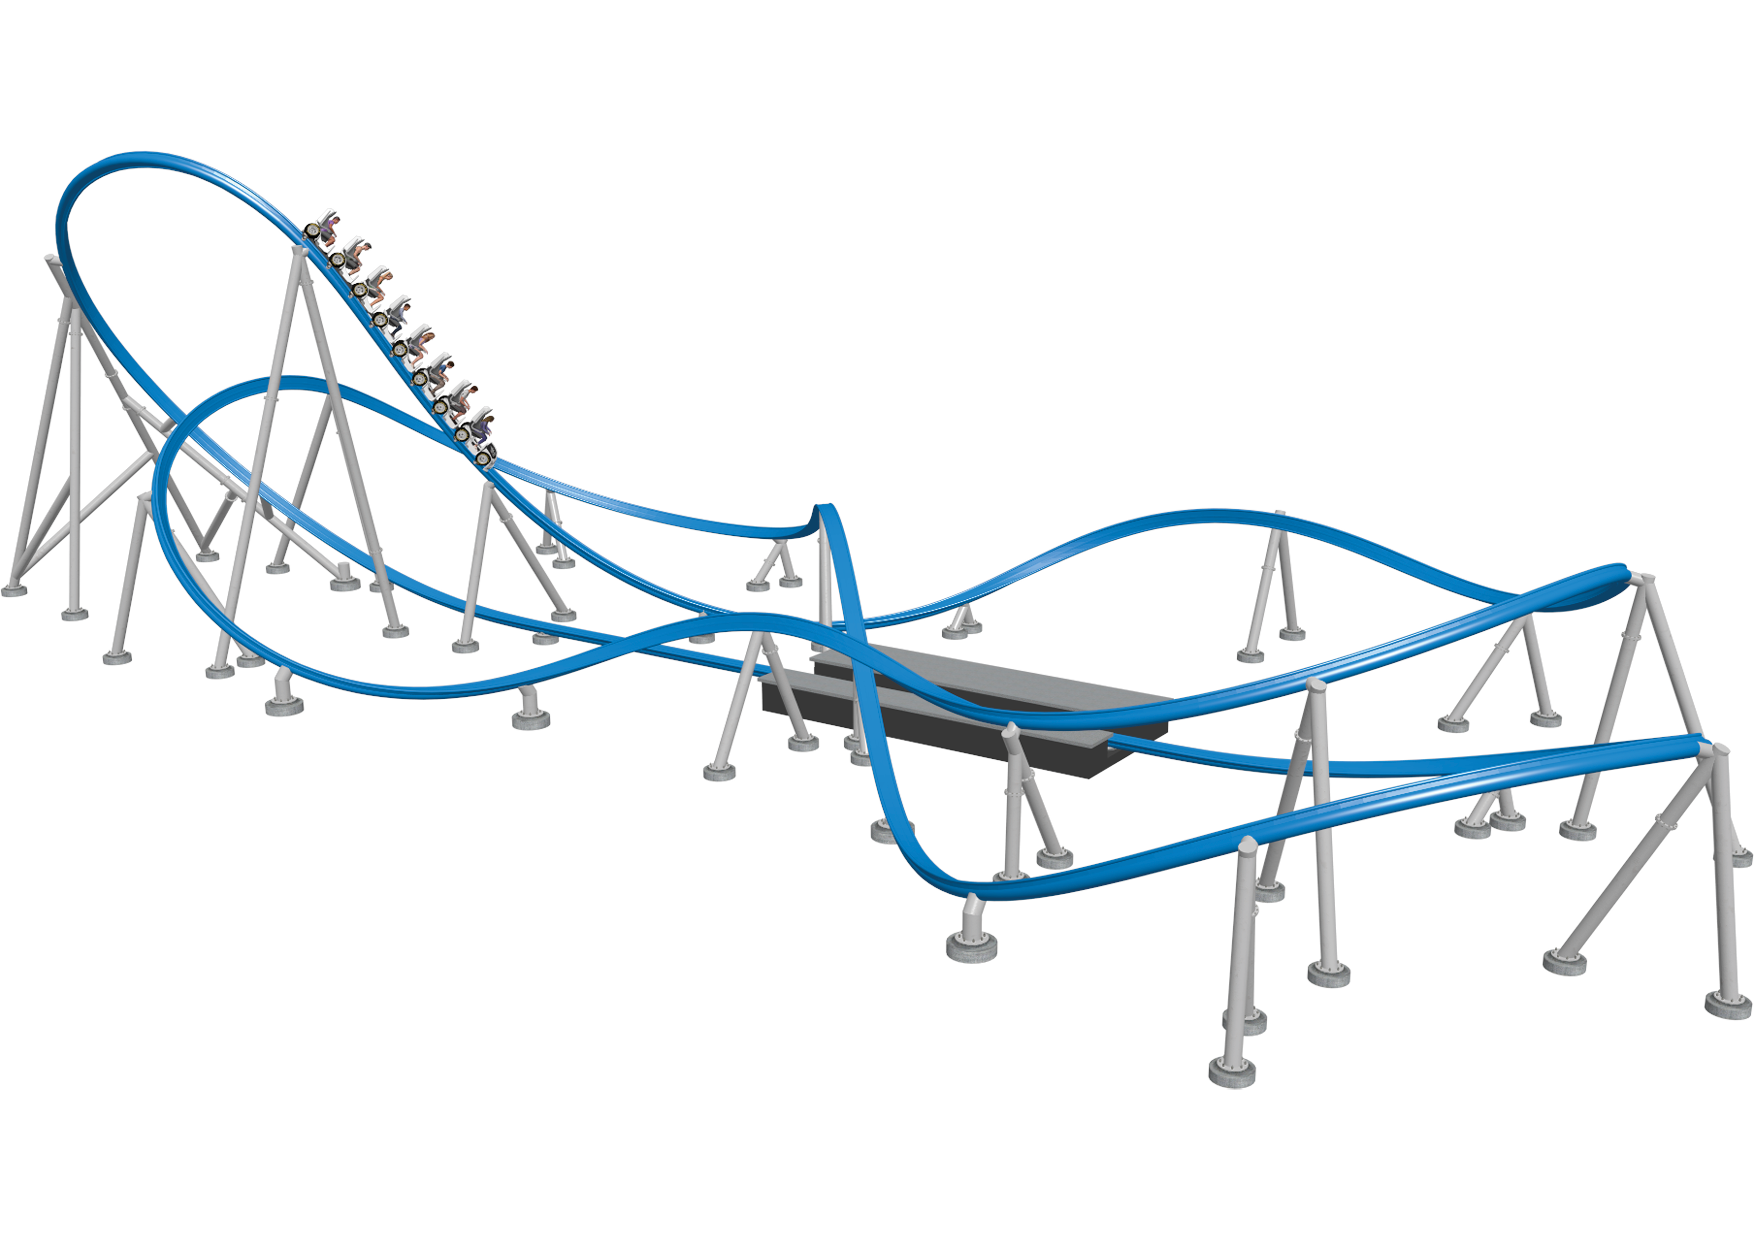 Intamin Sample Layout Hot Racer Supercharged Roller Coaster